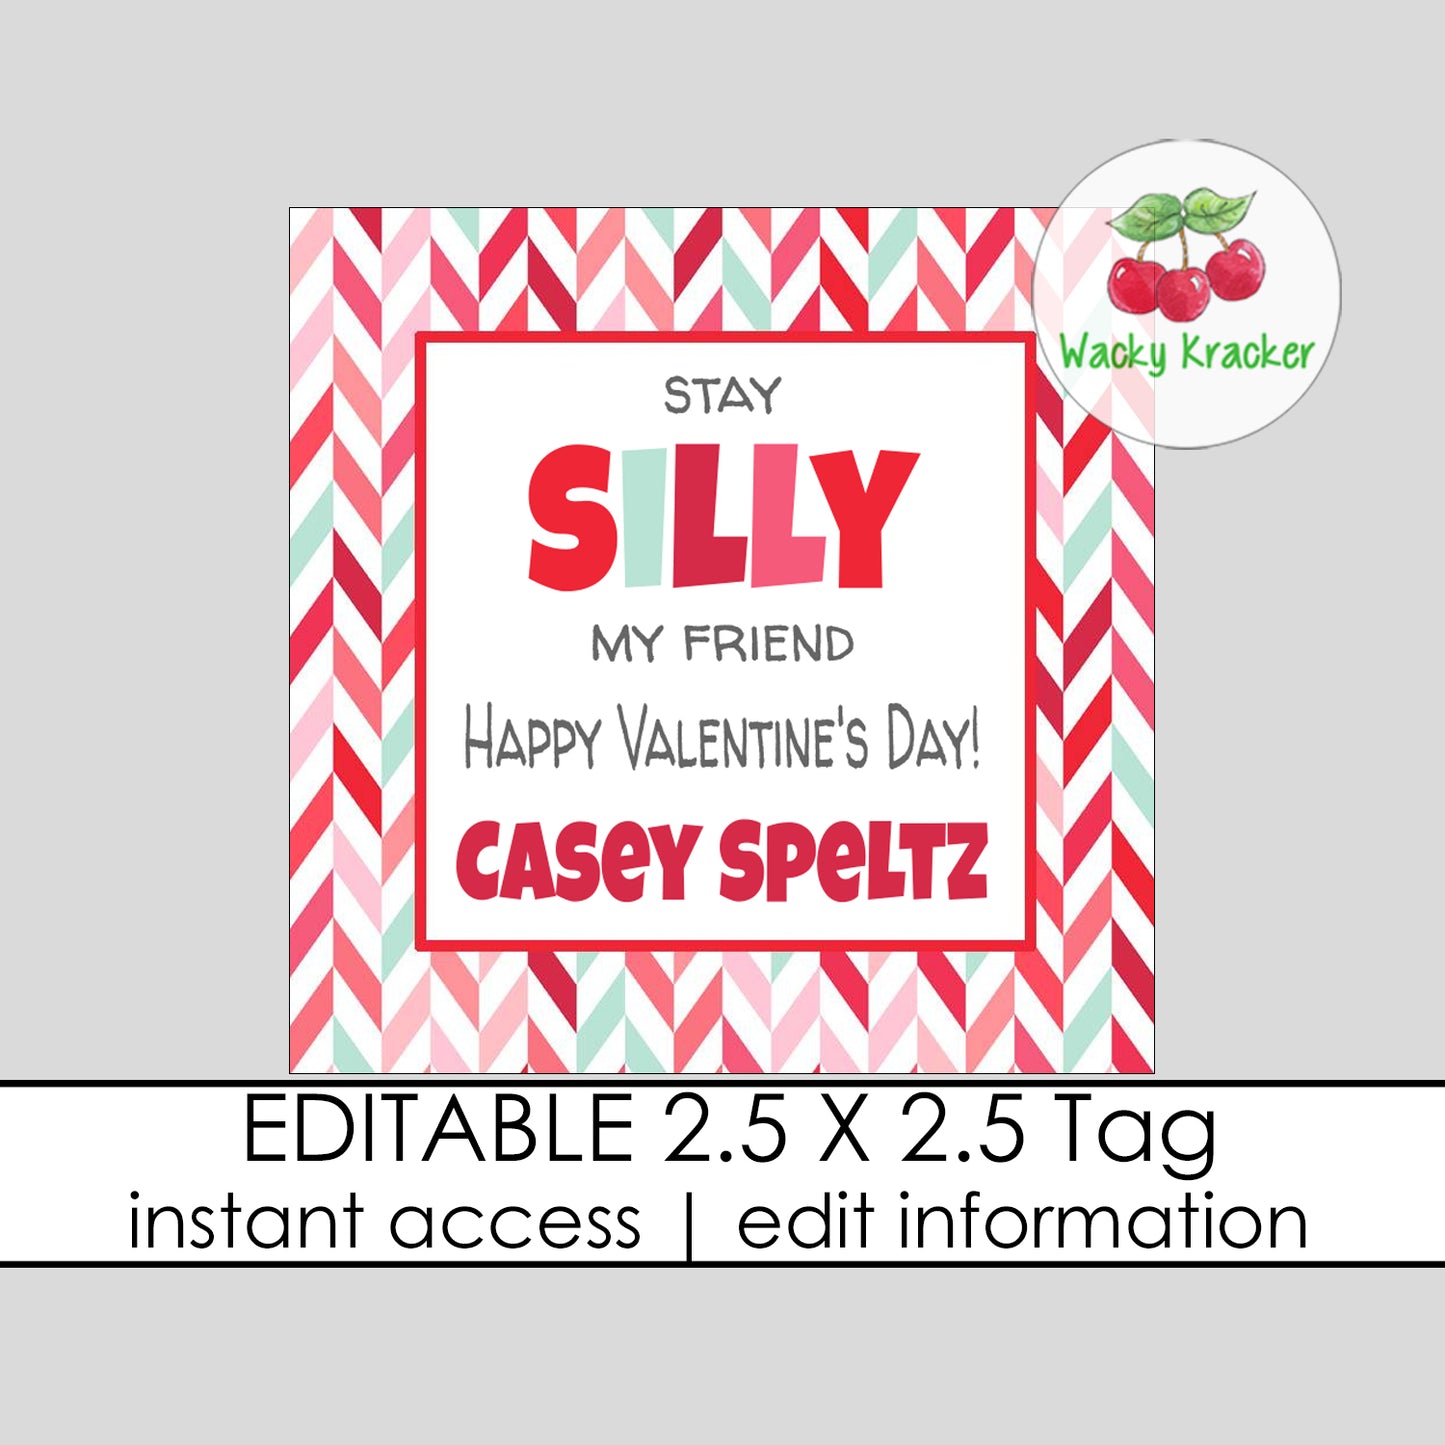 Stay Silly Valentine Tag